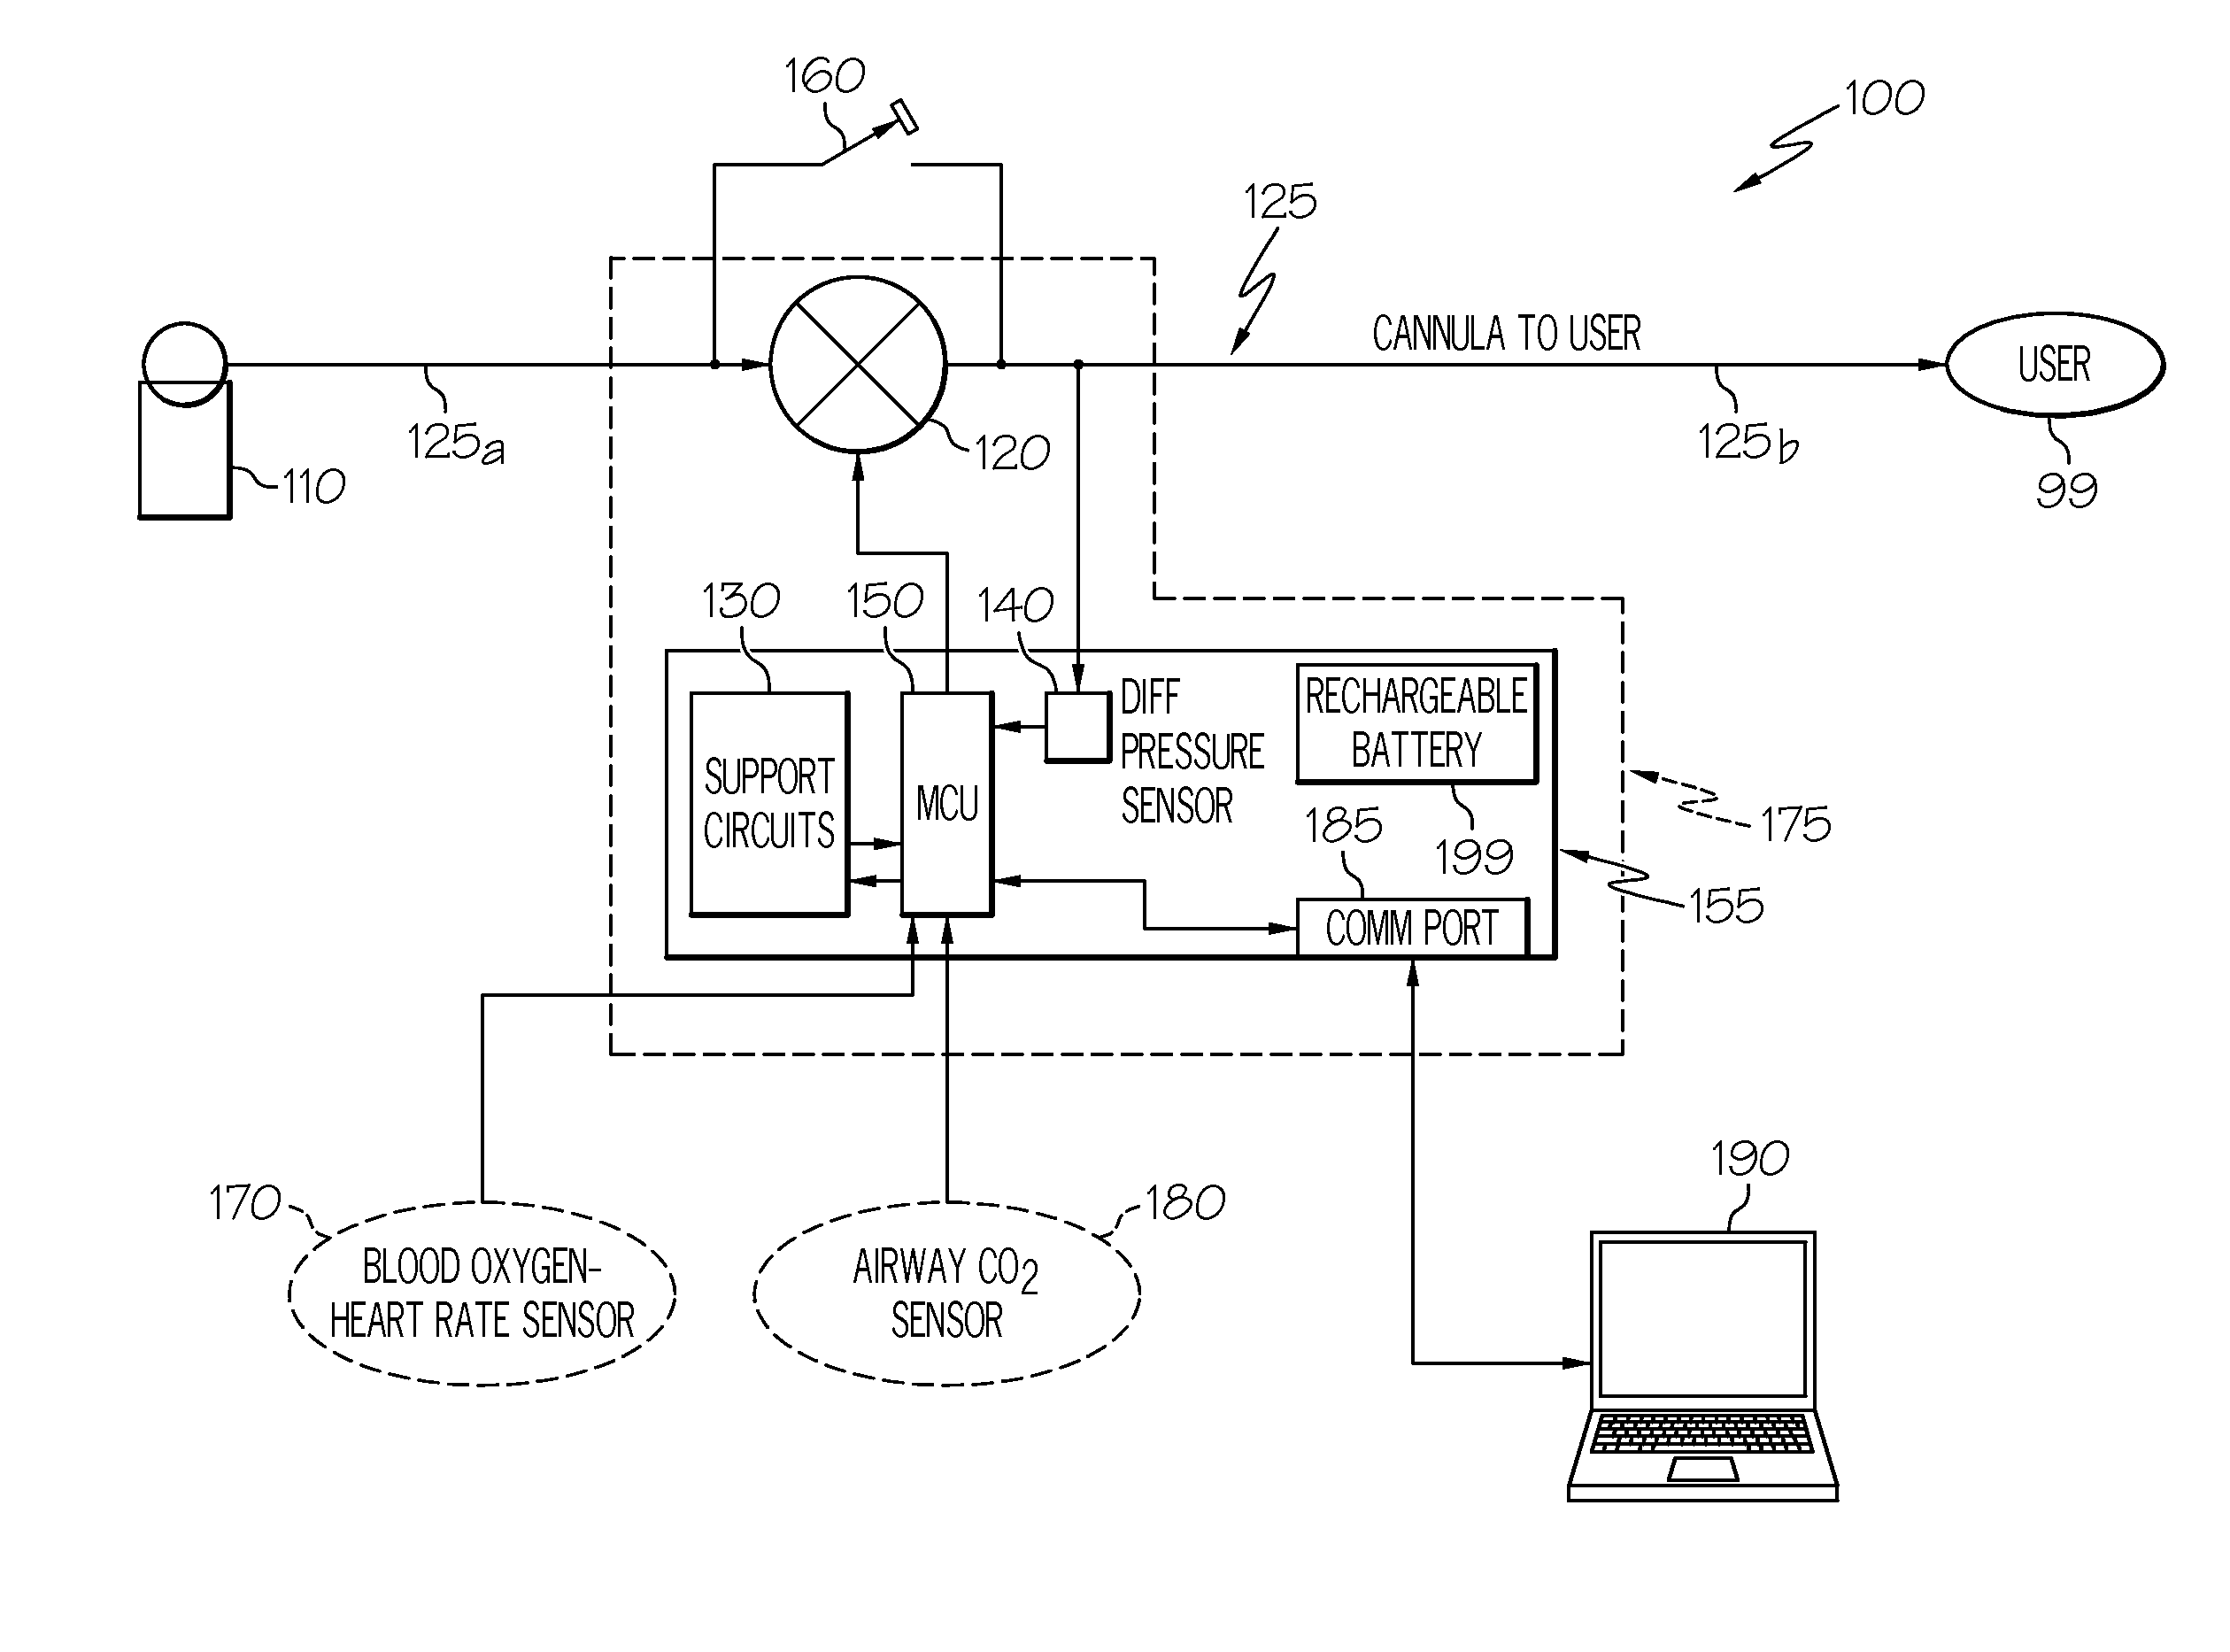 Automated fluid delivery system and method